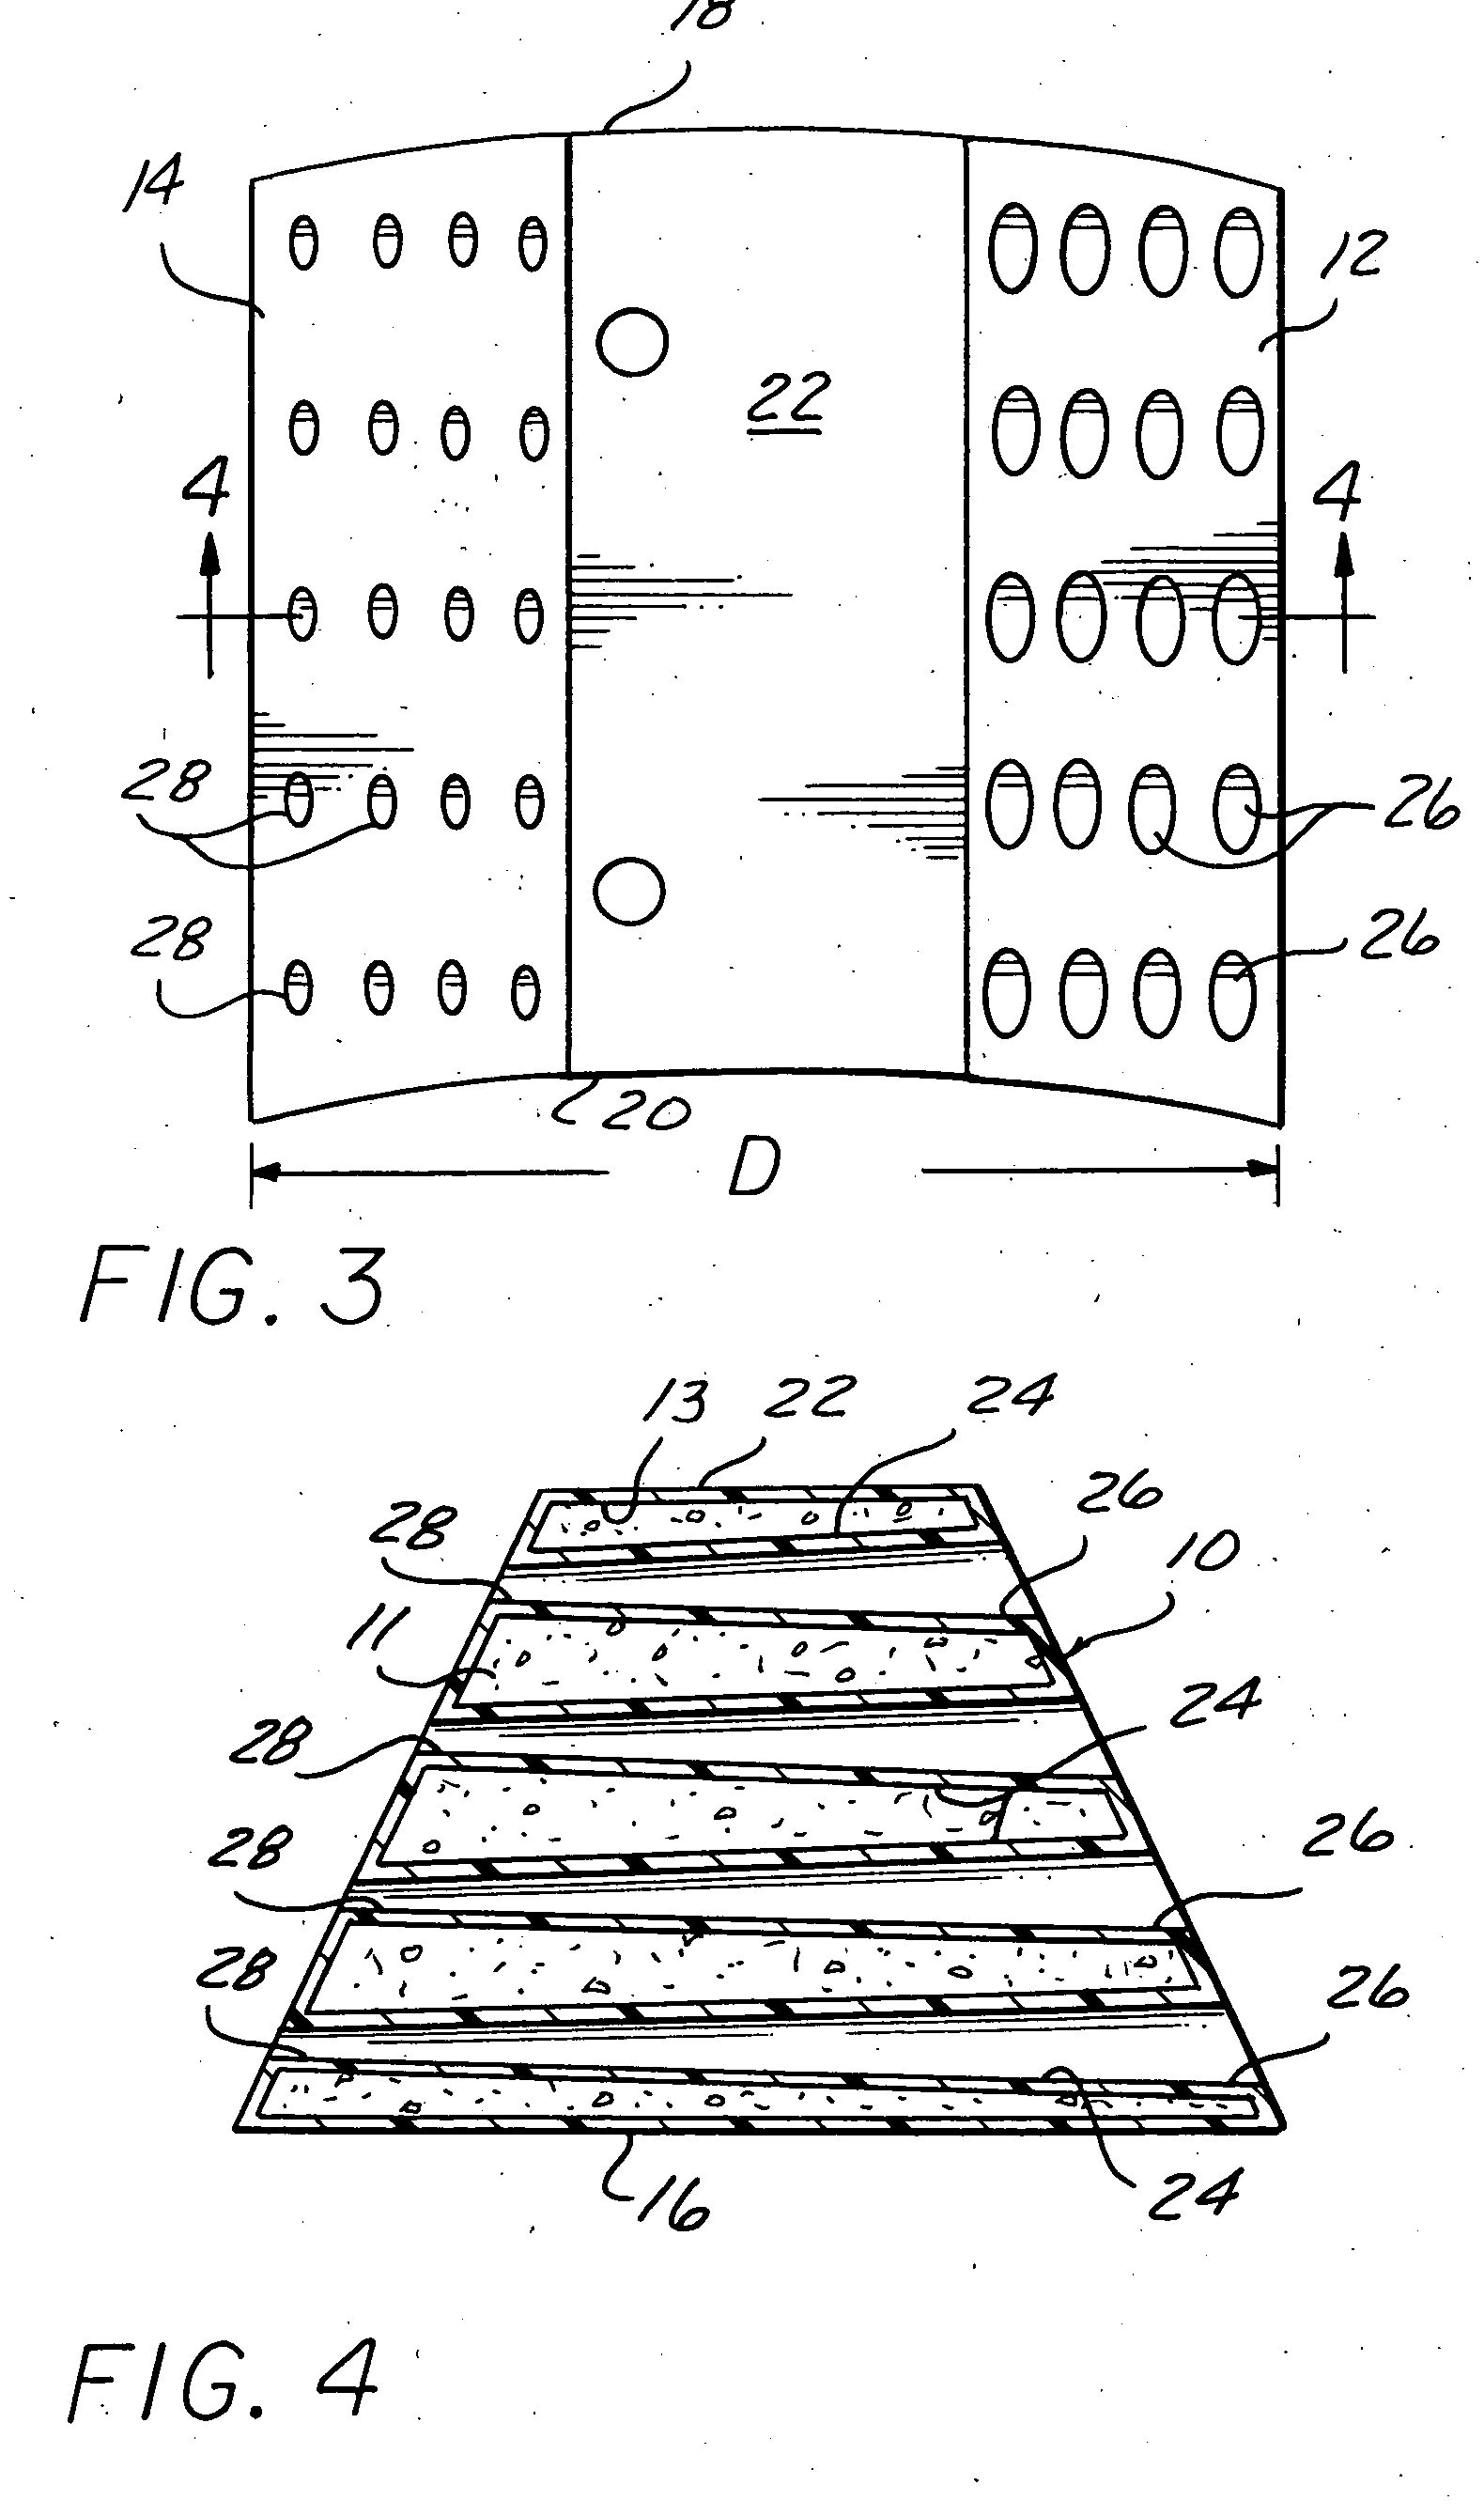 Apparatus and method for rebuilding a sand beach